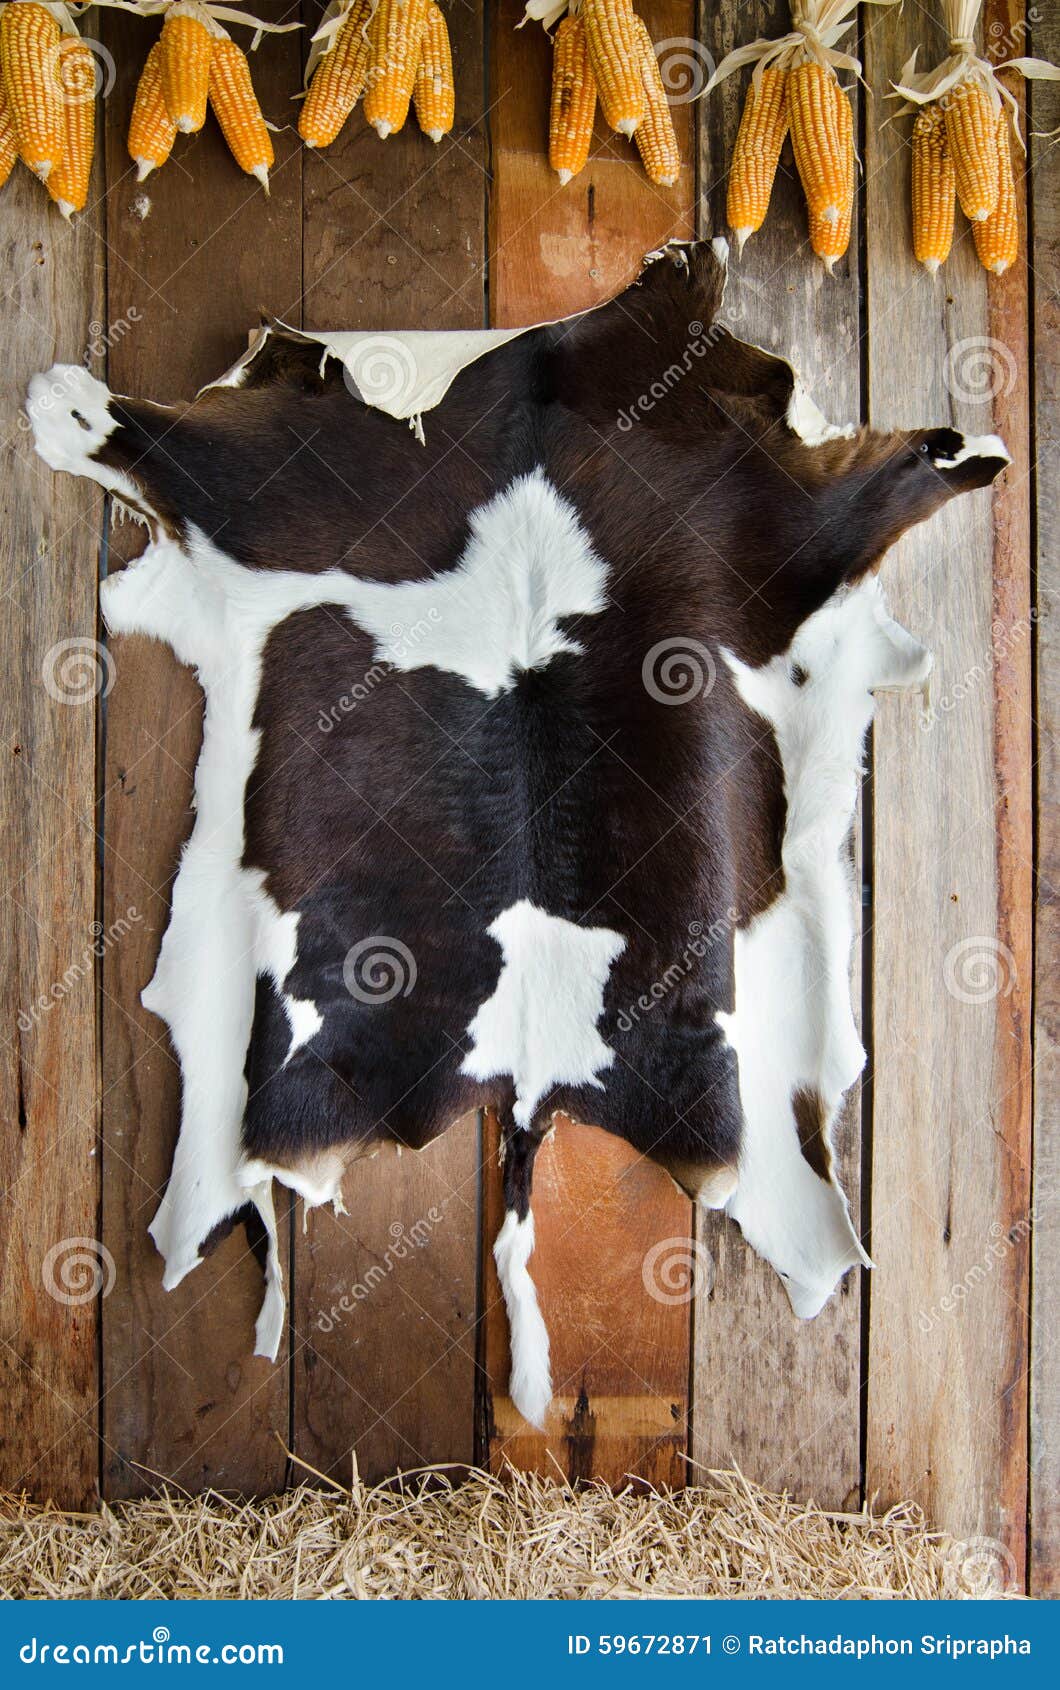 how to hang a cowhide on a wall